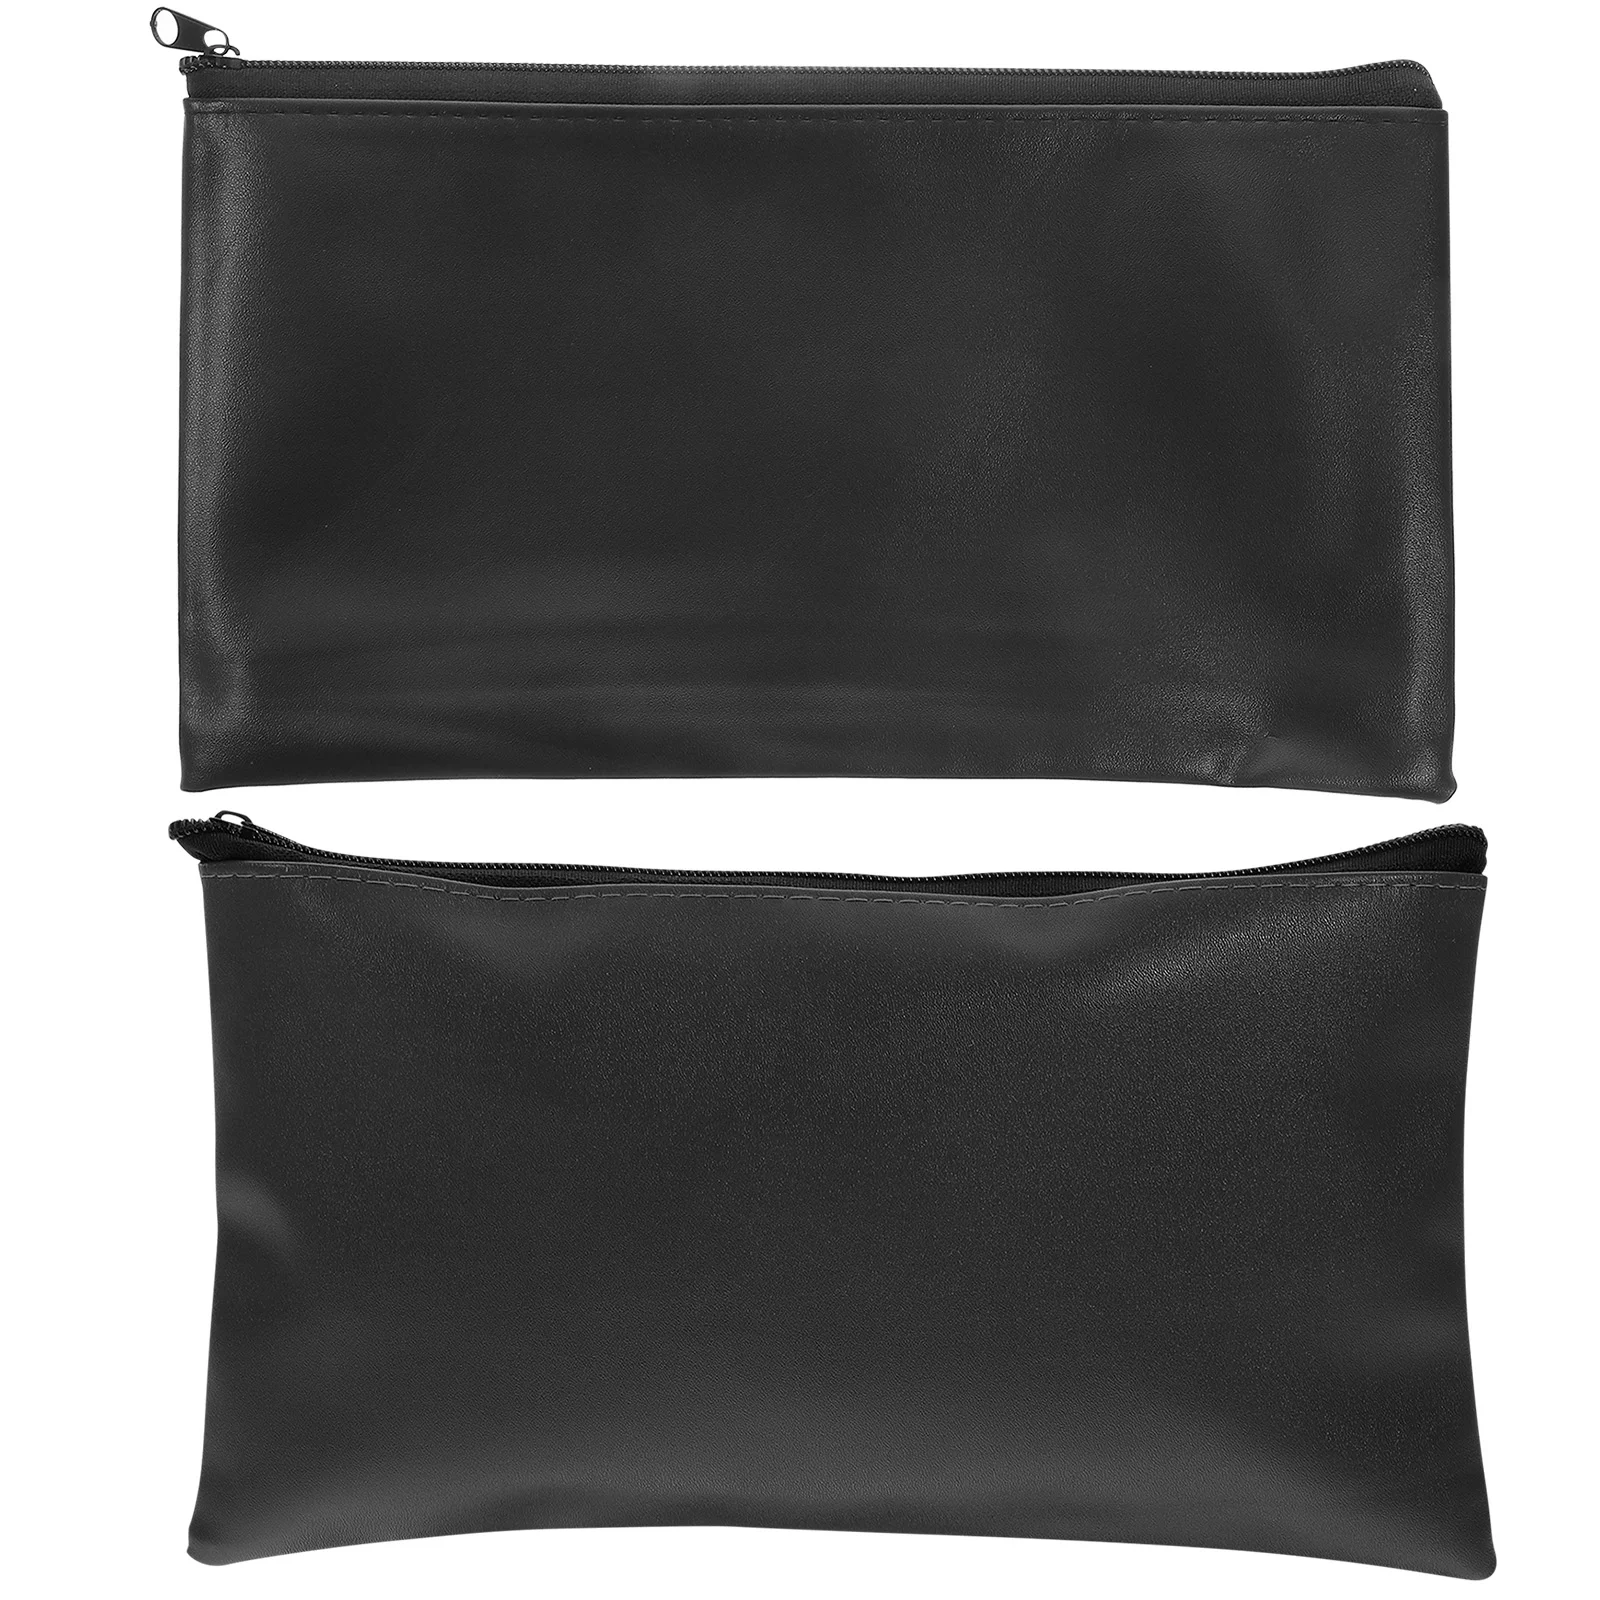 

Waterproof Deposit Bag File Folder Pouch Money Pouches for Cash Document Holder Safe Bags with Zipper